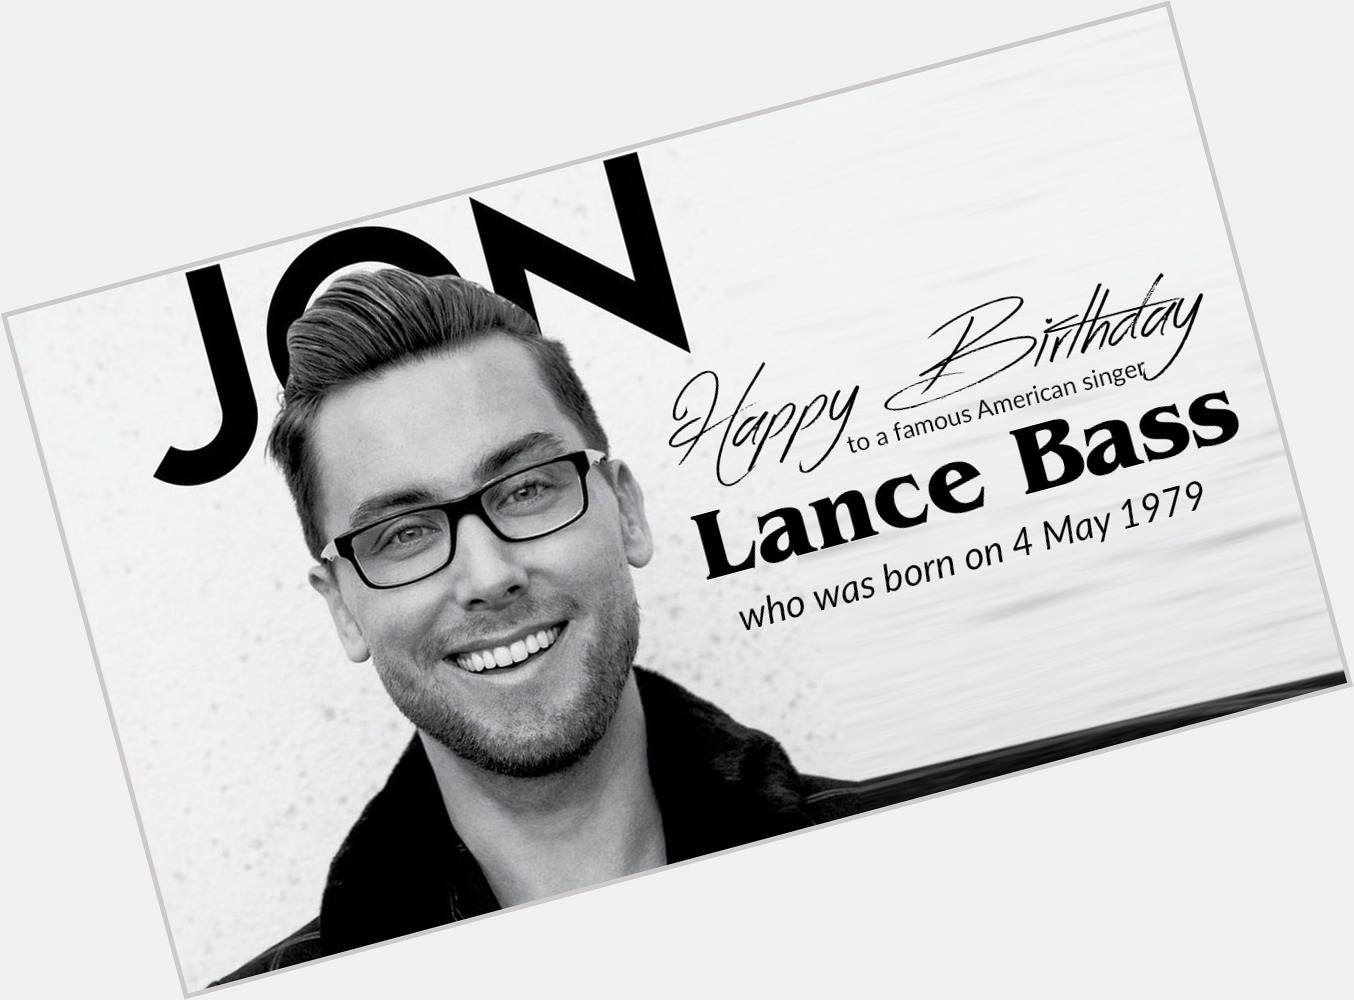 Happy Birthday to a famous American singer Lance Bass who was born on 4 May 1979. 